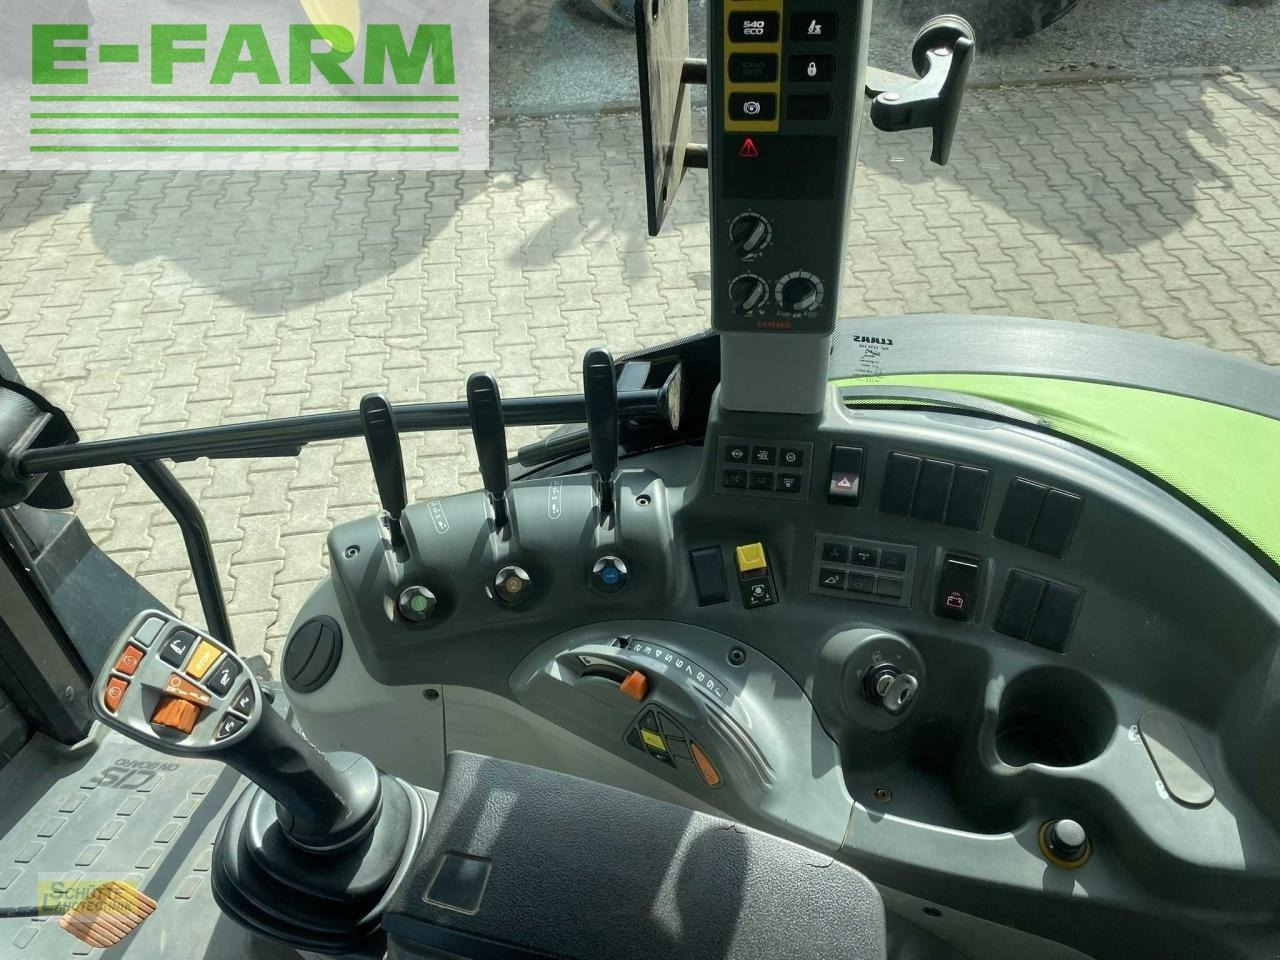 Tracteur agricole CLAAS arion 420